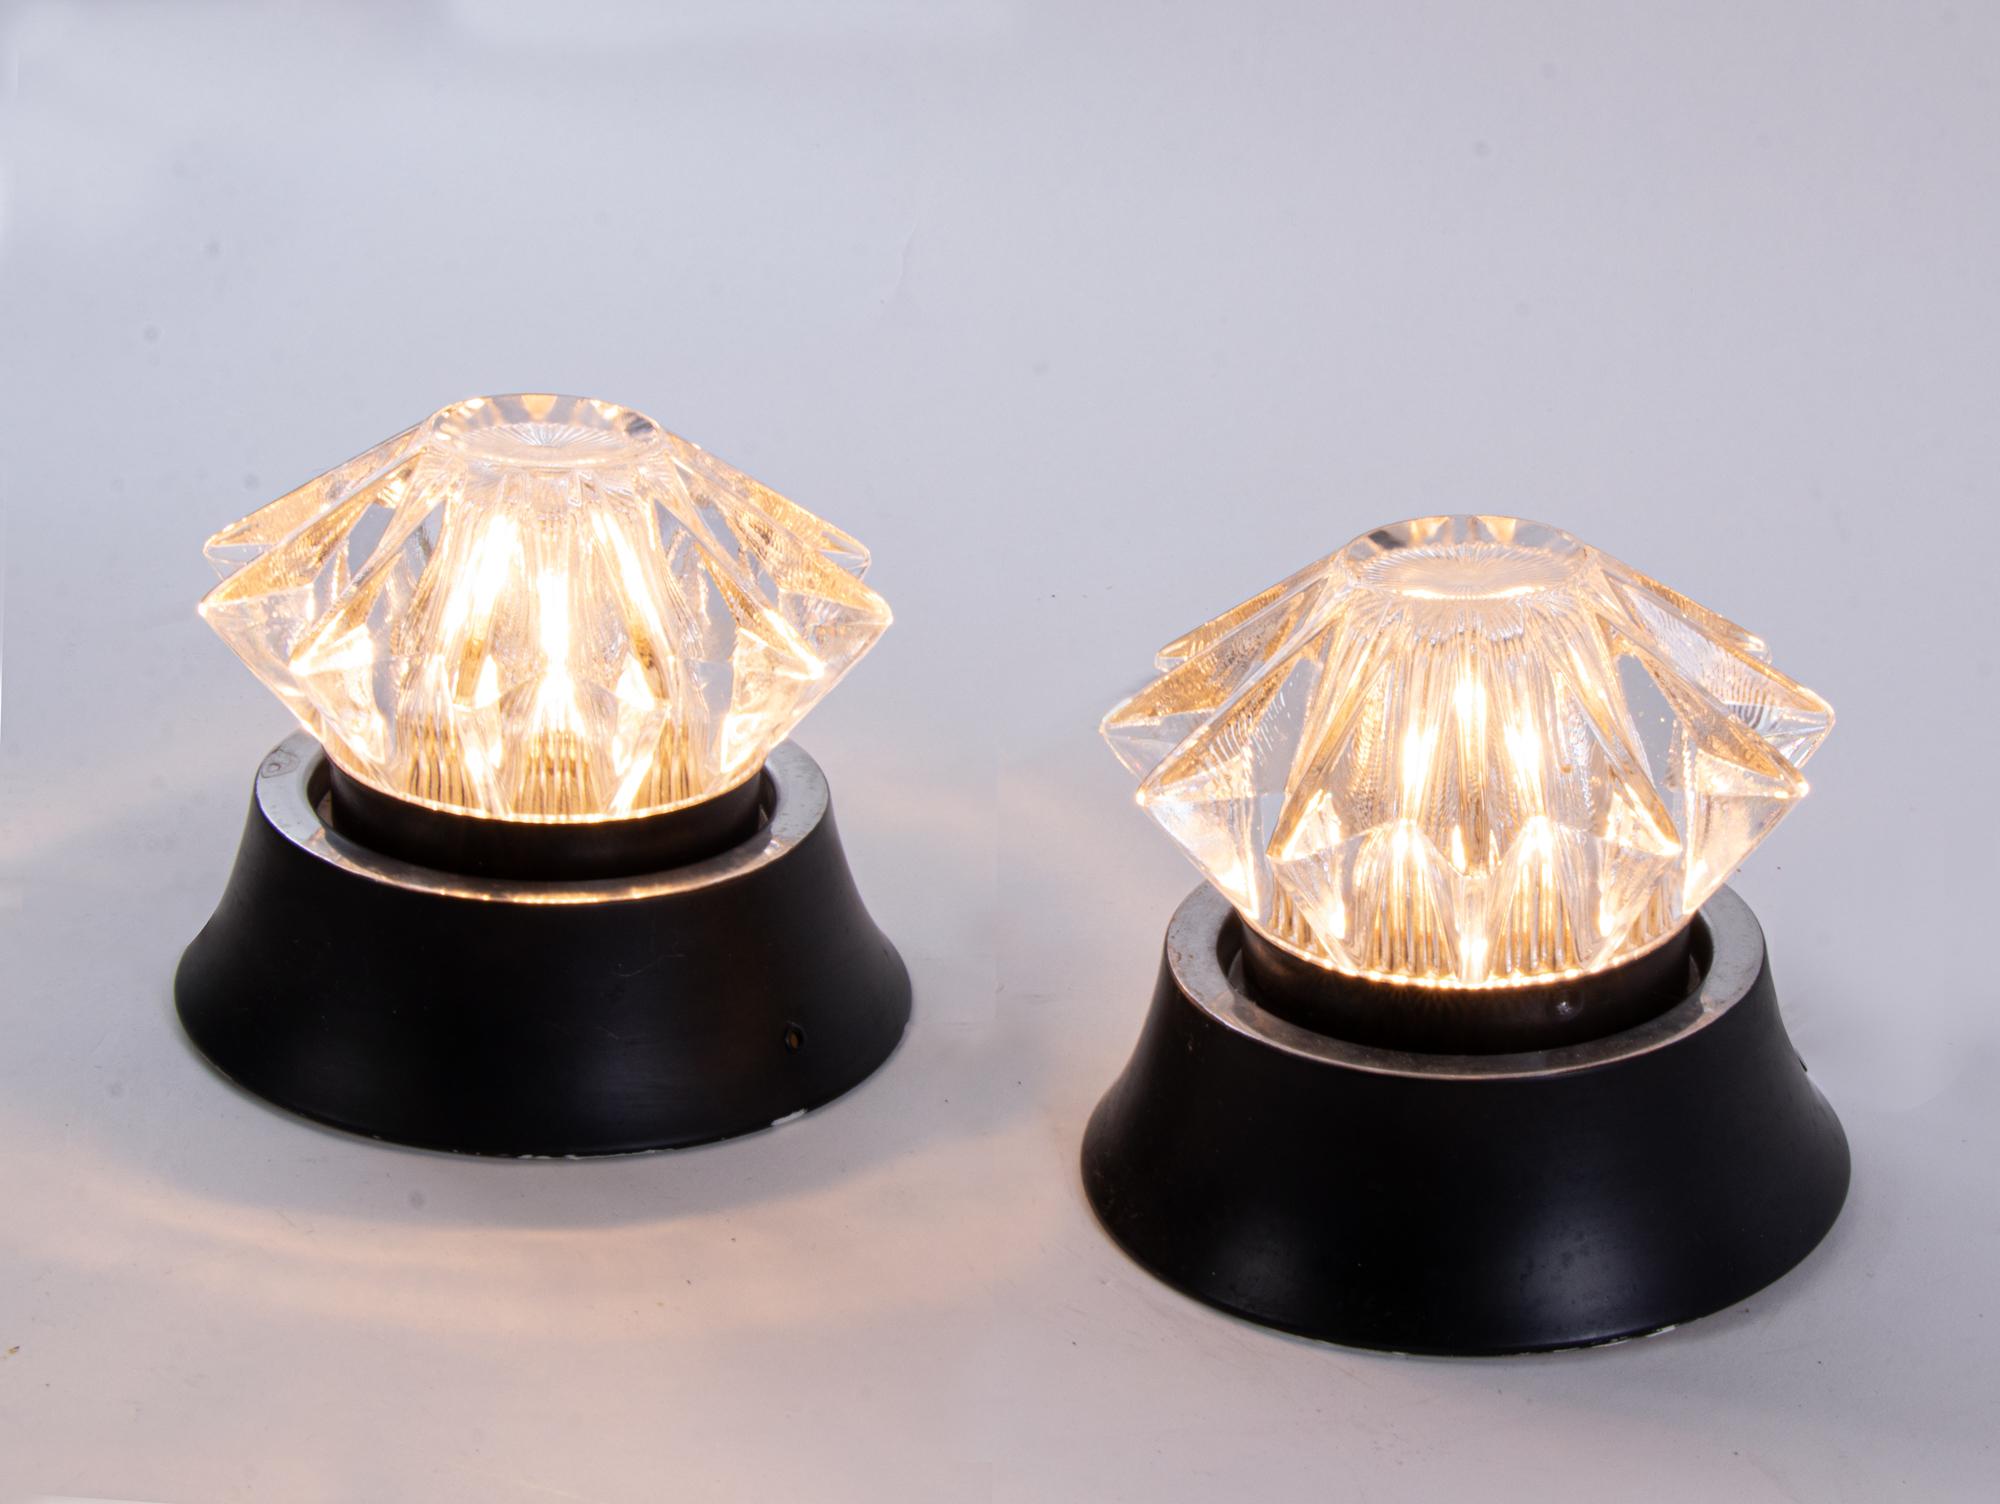 Elegant pair of modernist star-shaped glass and aluminium wall lights manufactured in Italy in the 1960s. 

Style: mid century modern, space age. 
Colors: clear and black. 
Materials: glass and aluminium. 
Measures: h 5.5